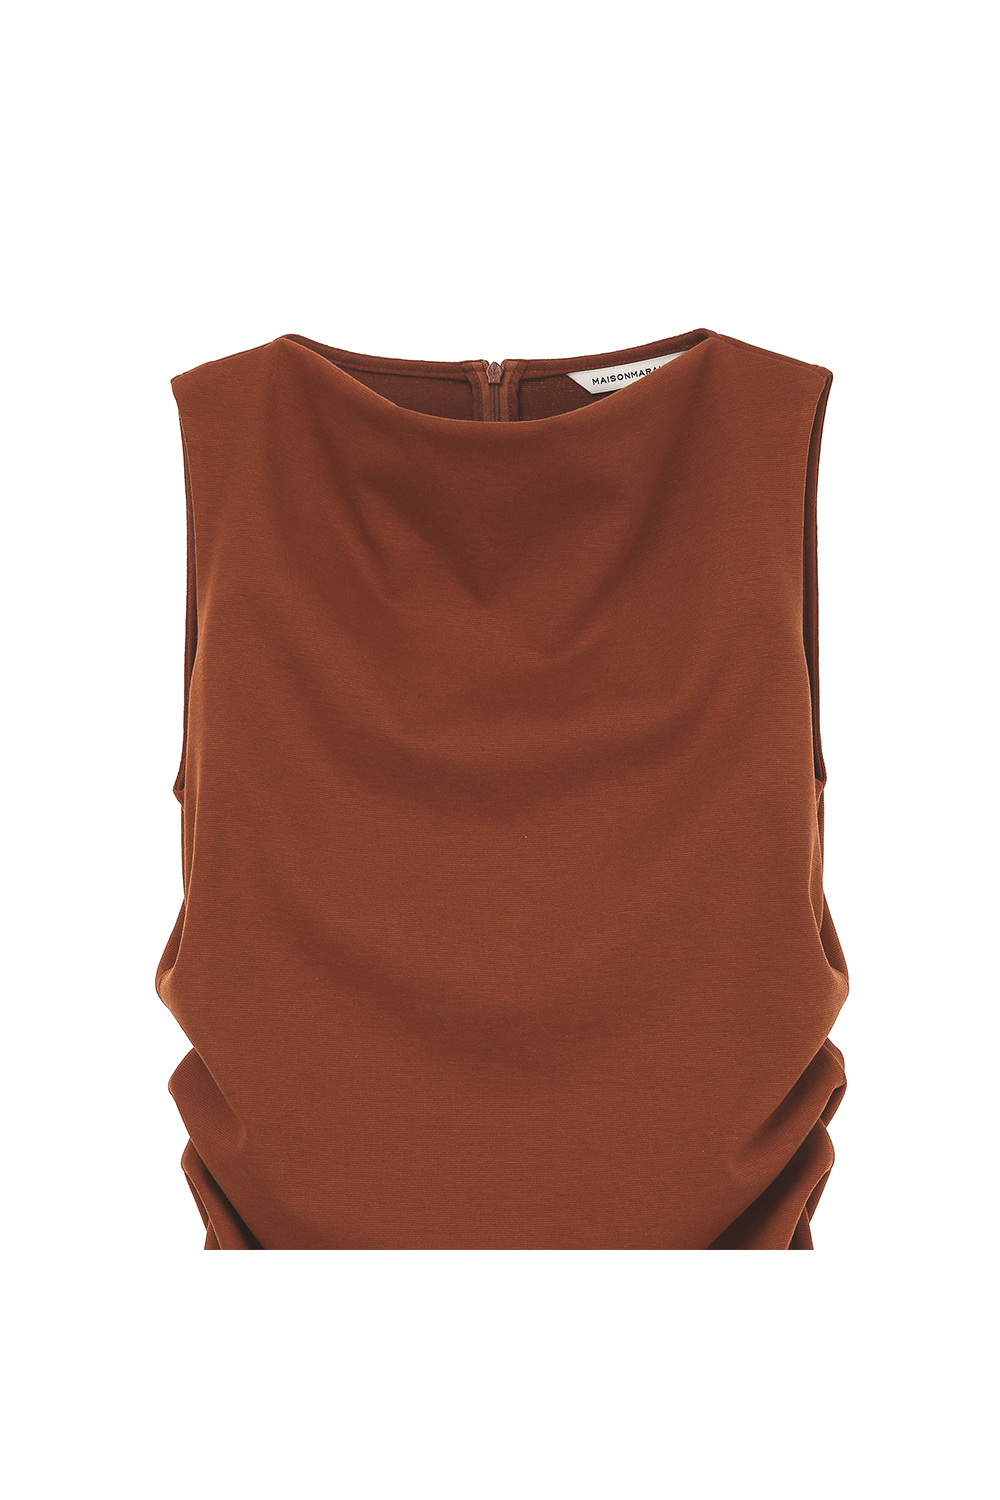 sleeveless brown color image-S1L7